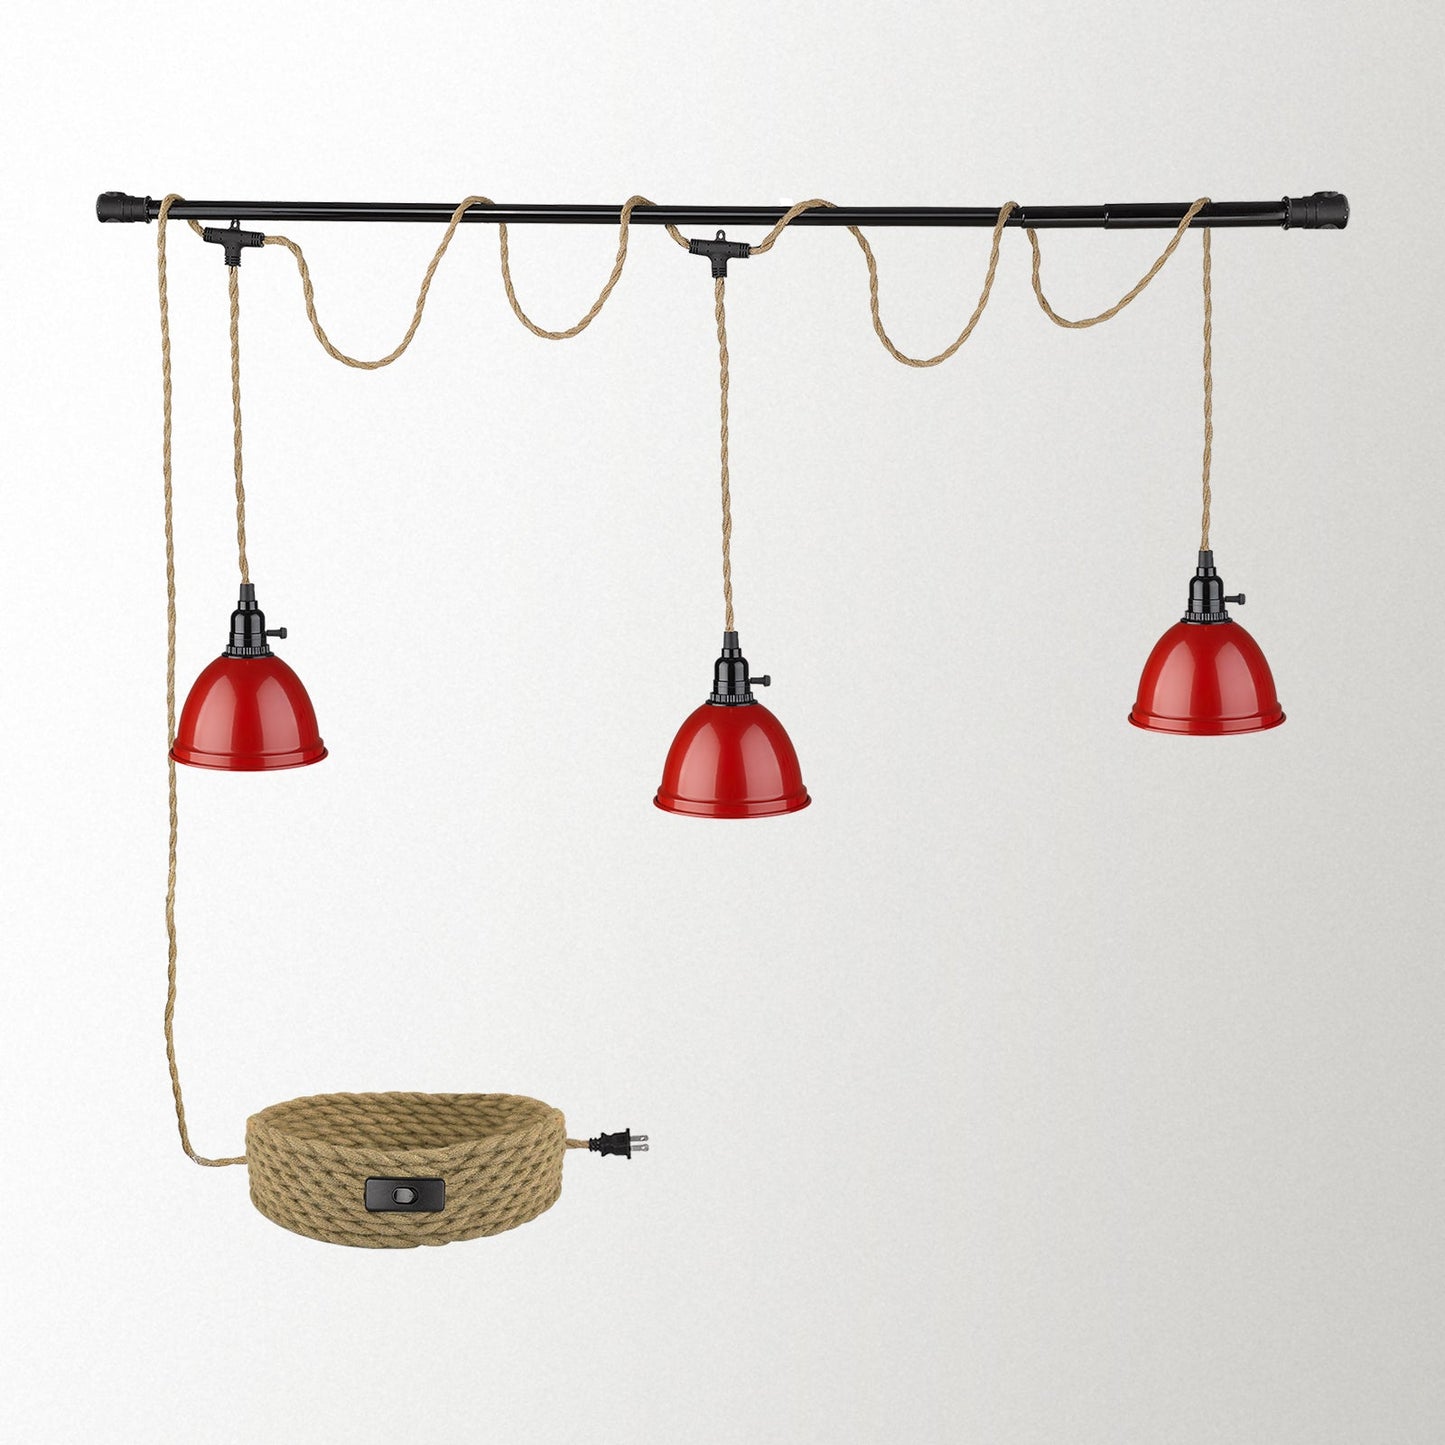 
                  
                    Emliviar 3-Light Plug in Chandelier - Modern Hanging Pendant Light with Cord for Kitchen Island Bedroom, 29FT Twisted Hemp Rope, Red Finish, YCE240-3 RED
                  
                